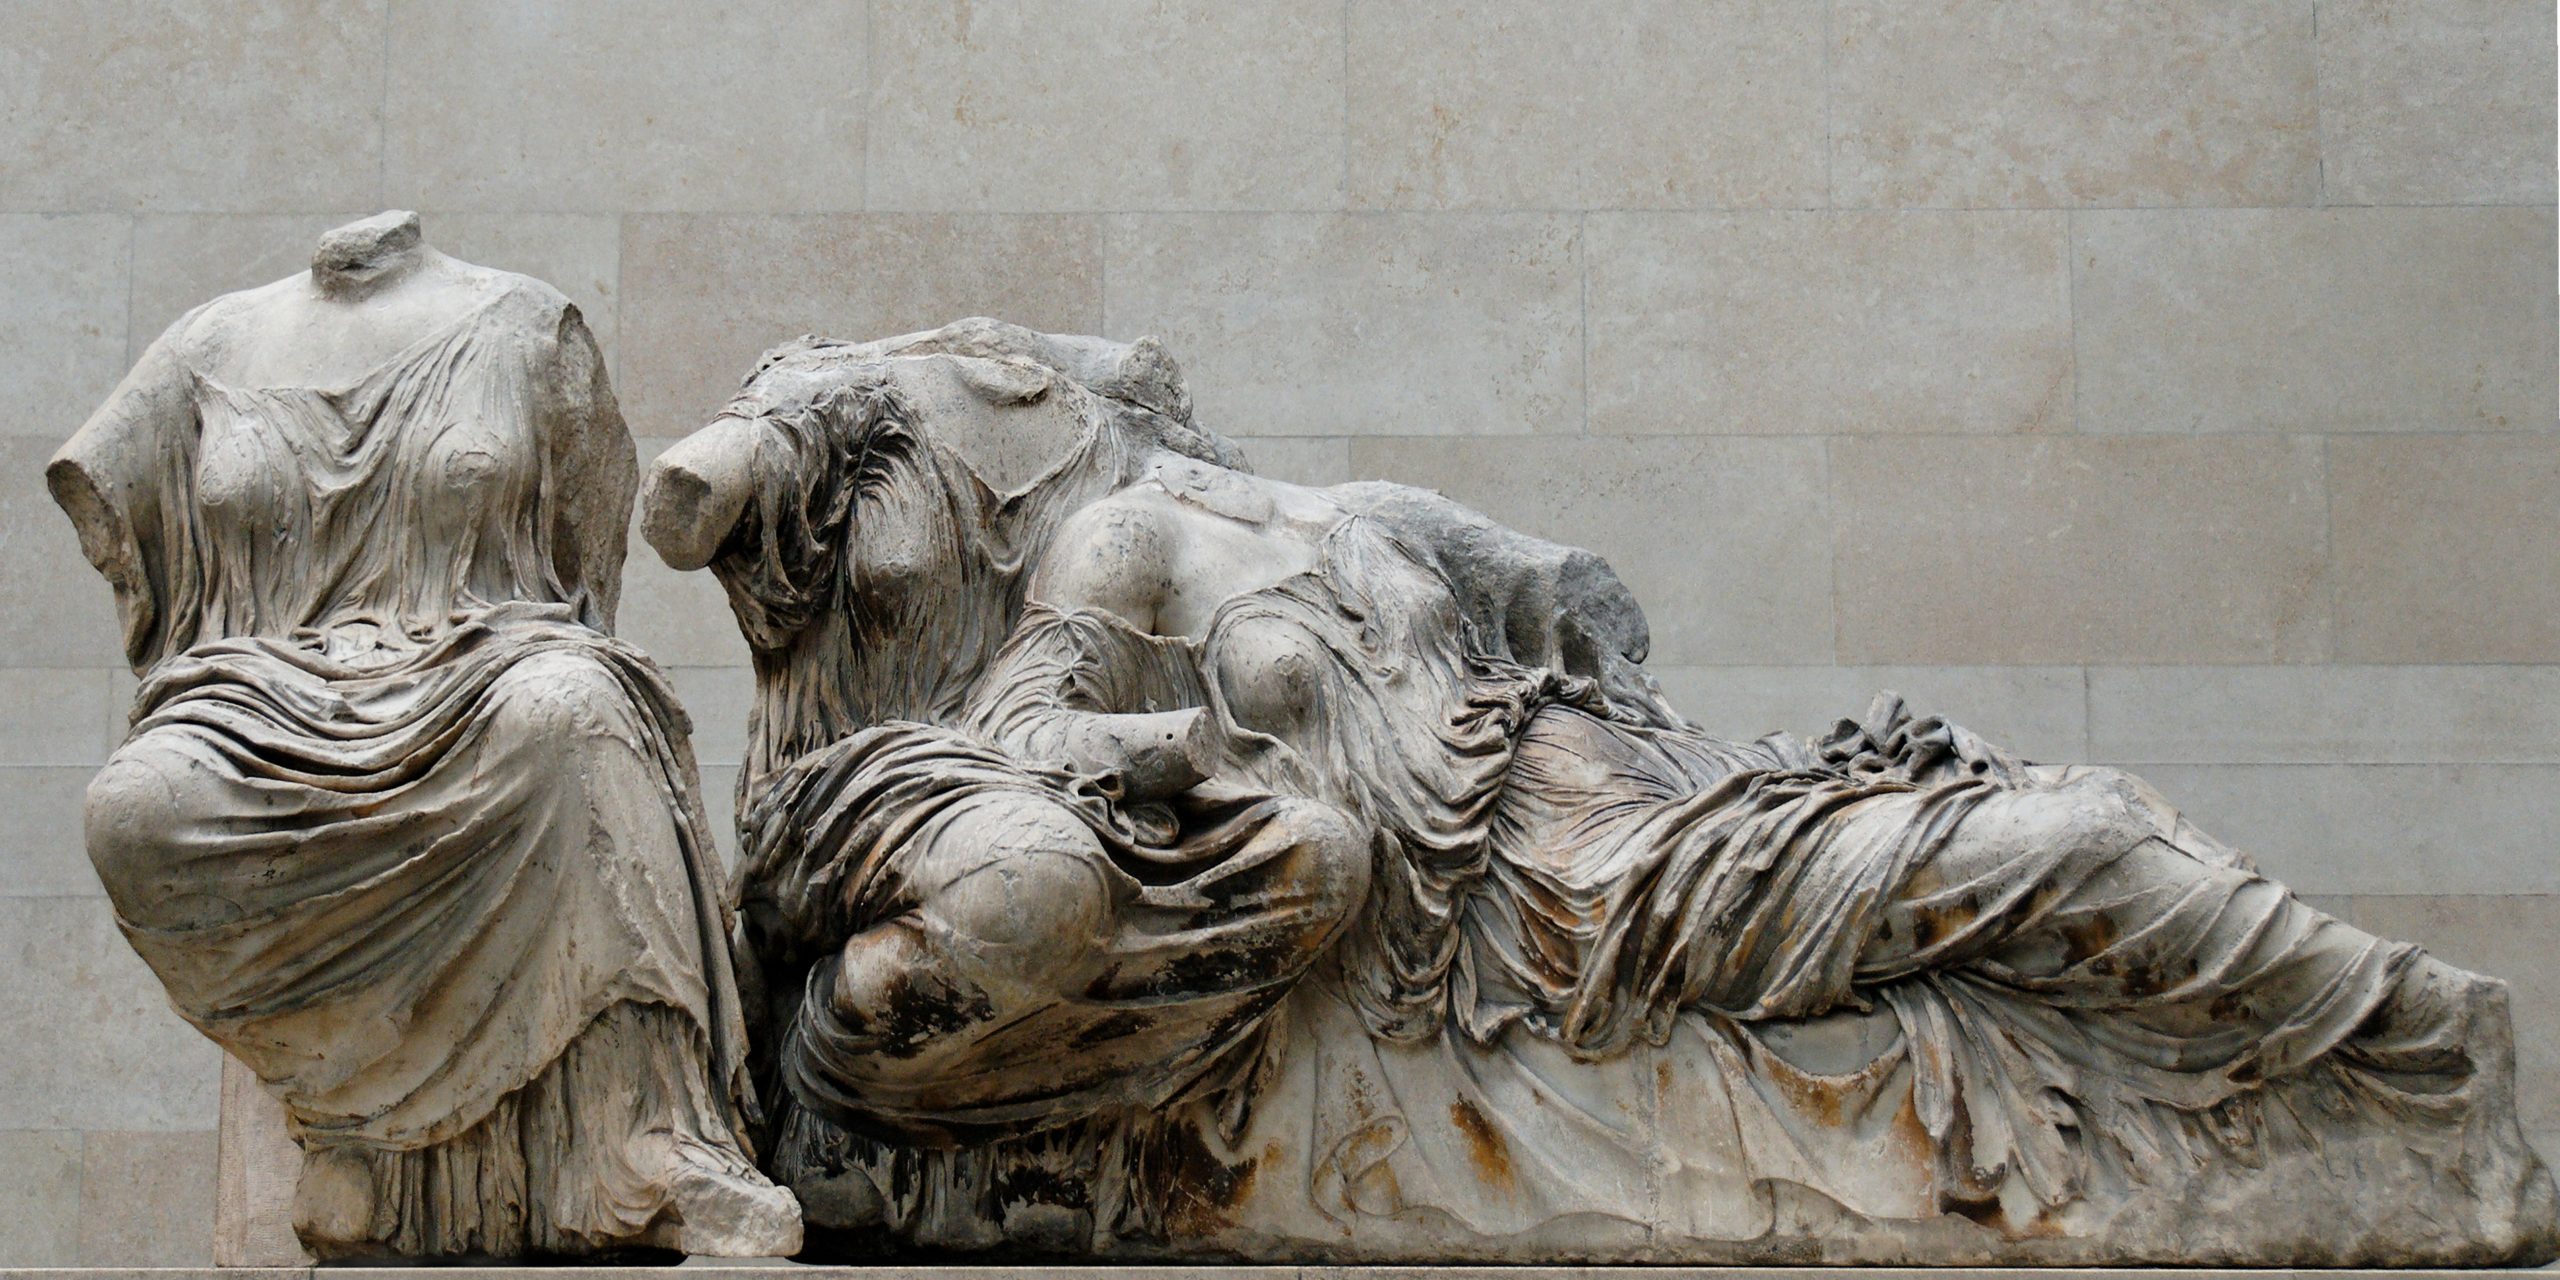 Aphrodite reclining with her head and shoulders on the lap of Dione. To their left sits Hestia. All three are dressed in sheer robes that cling to their forms. The figures are missing their heads and arms.